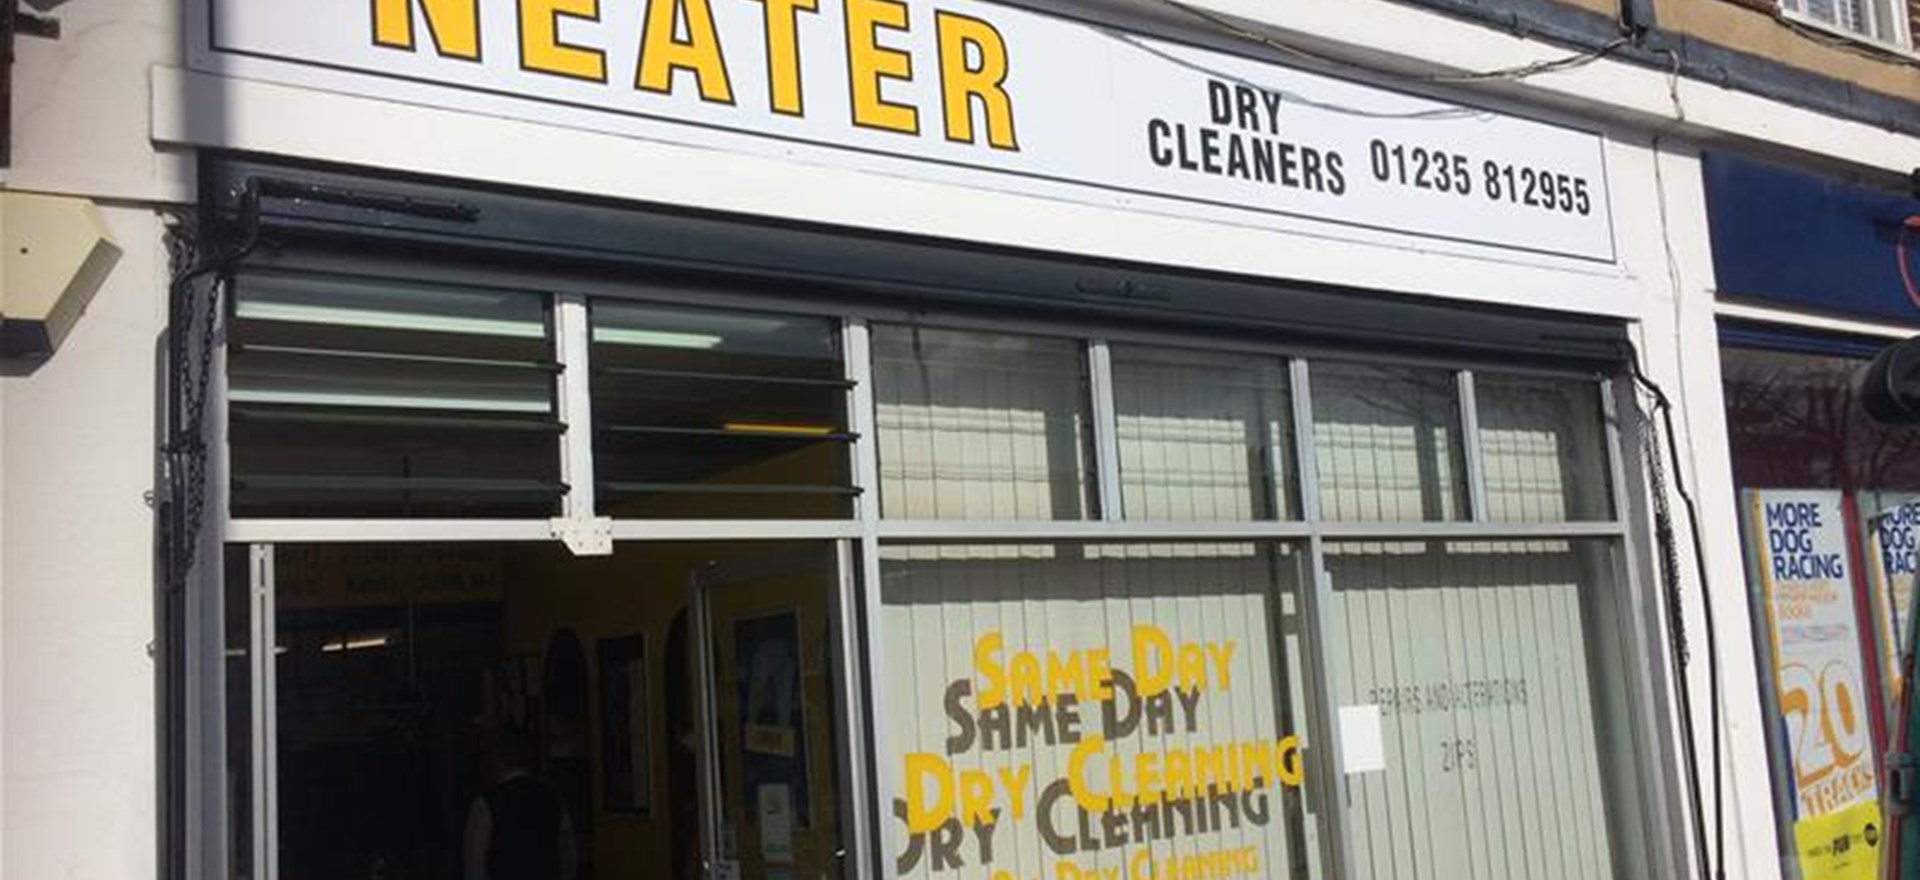 Neater Dry Cleaners Exterior Shop Fascia Oxford